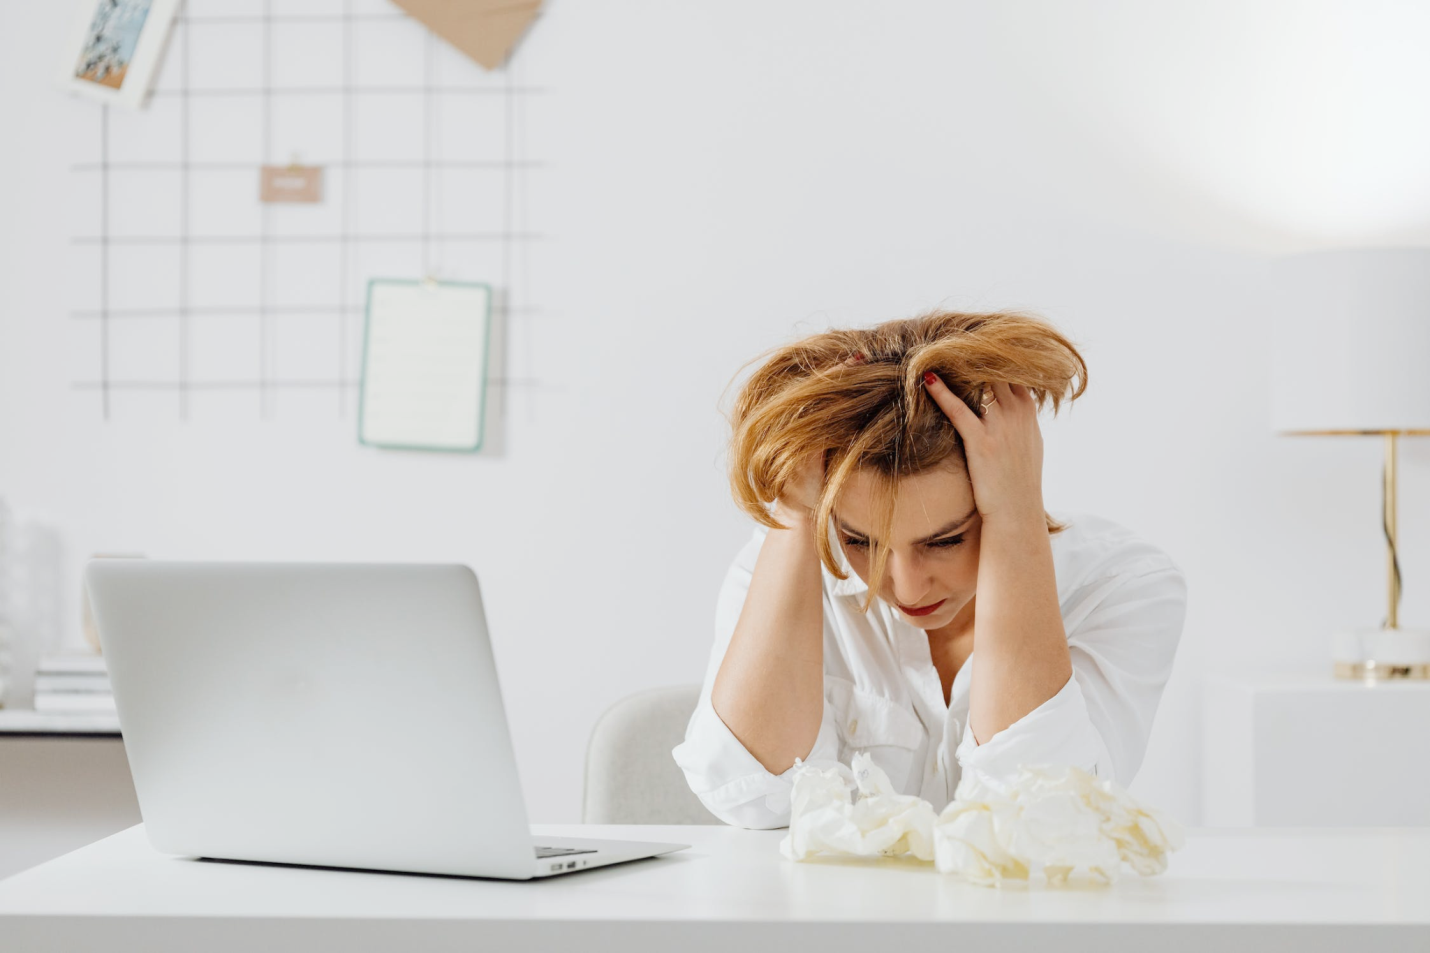 An image of a woman sitting in front of a laptop holding her head